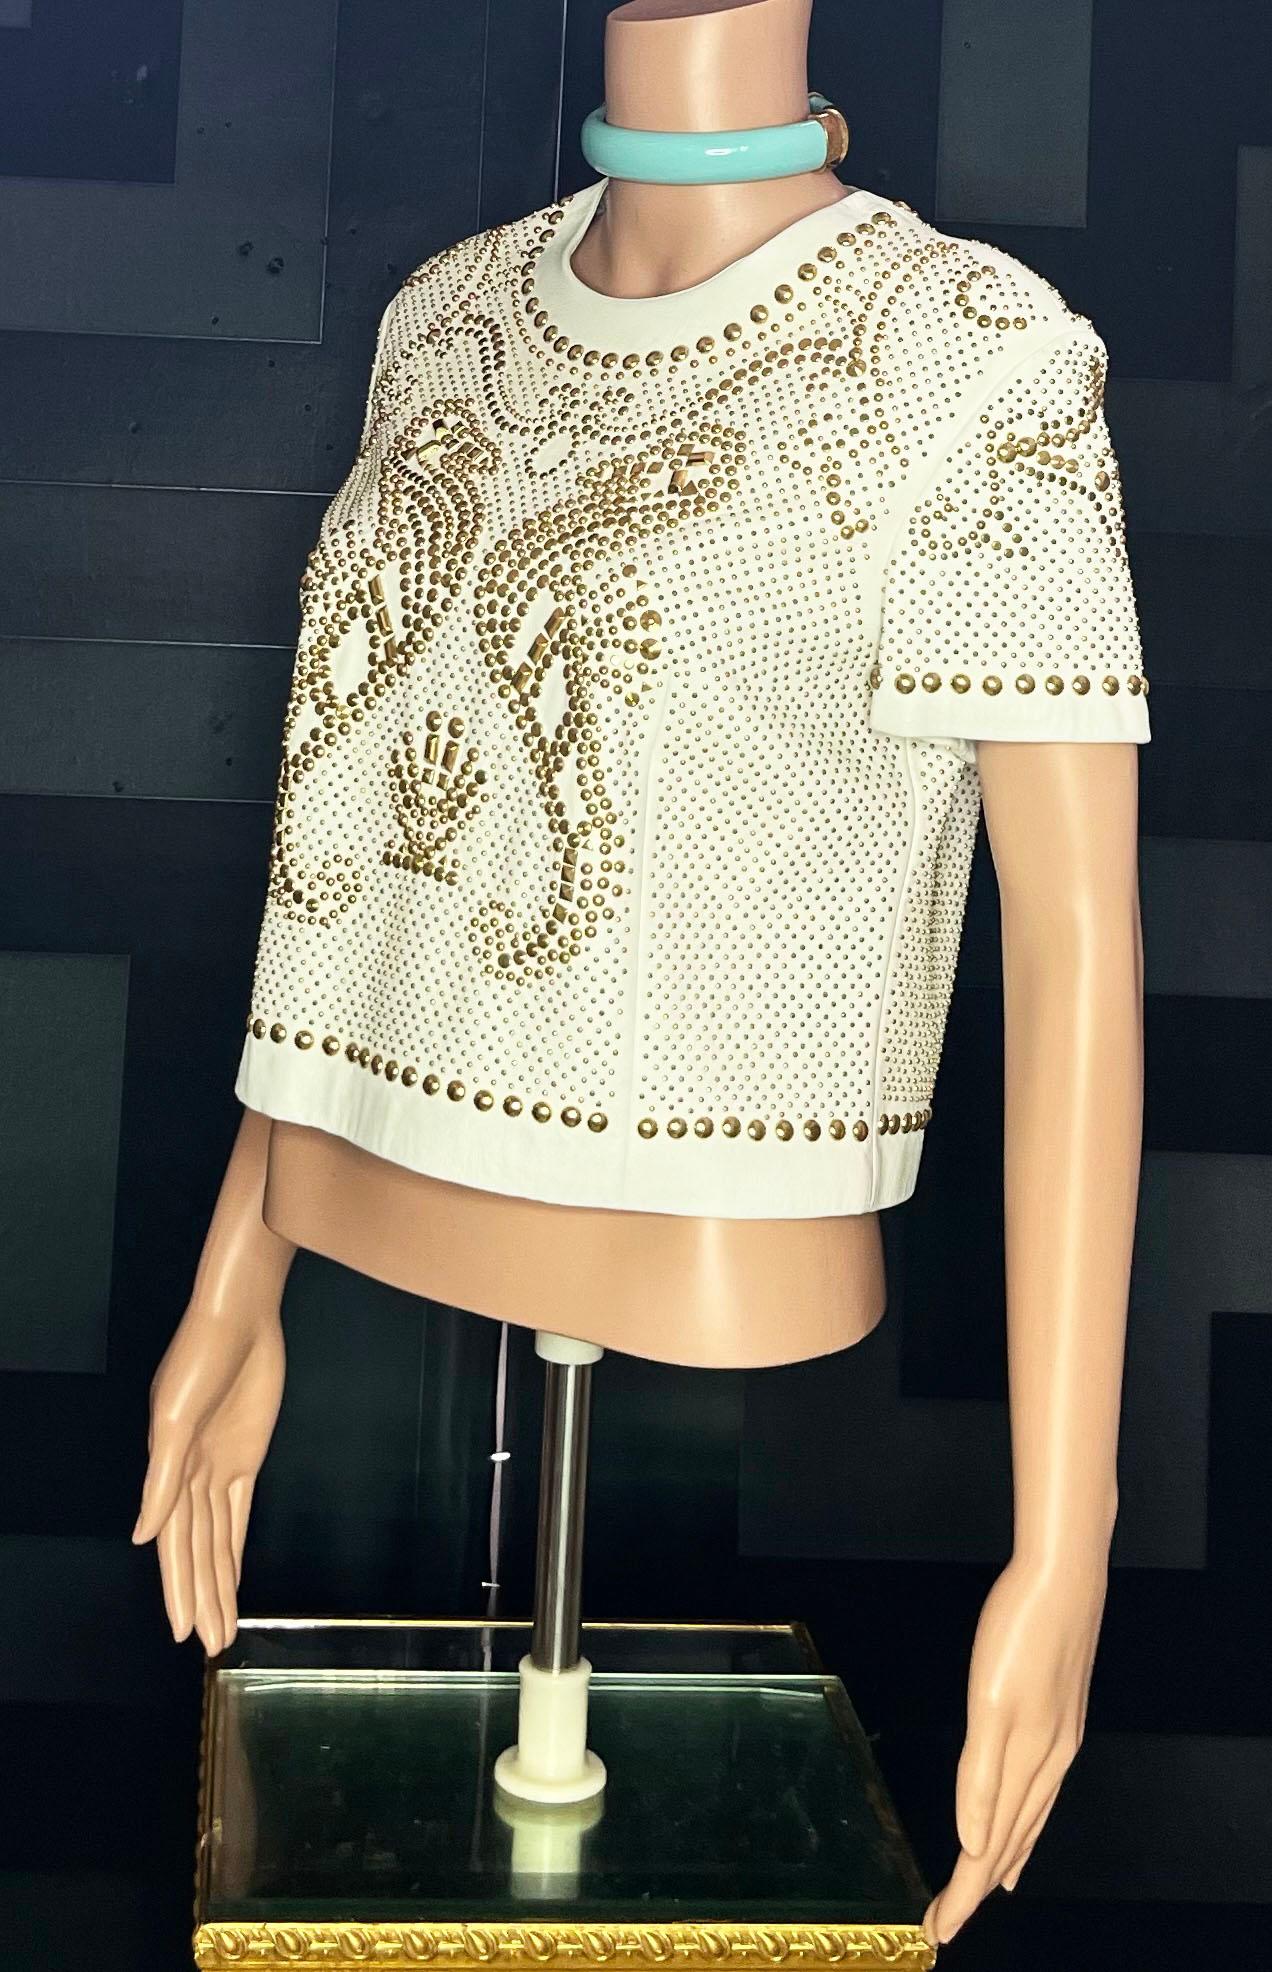 S/S 2012 L#26 VERSACE STUDDED LEATHER SEAHORSE CROP TOP Sz IT 44 For Sale 1